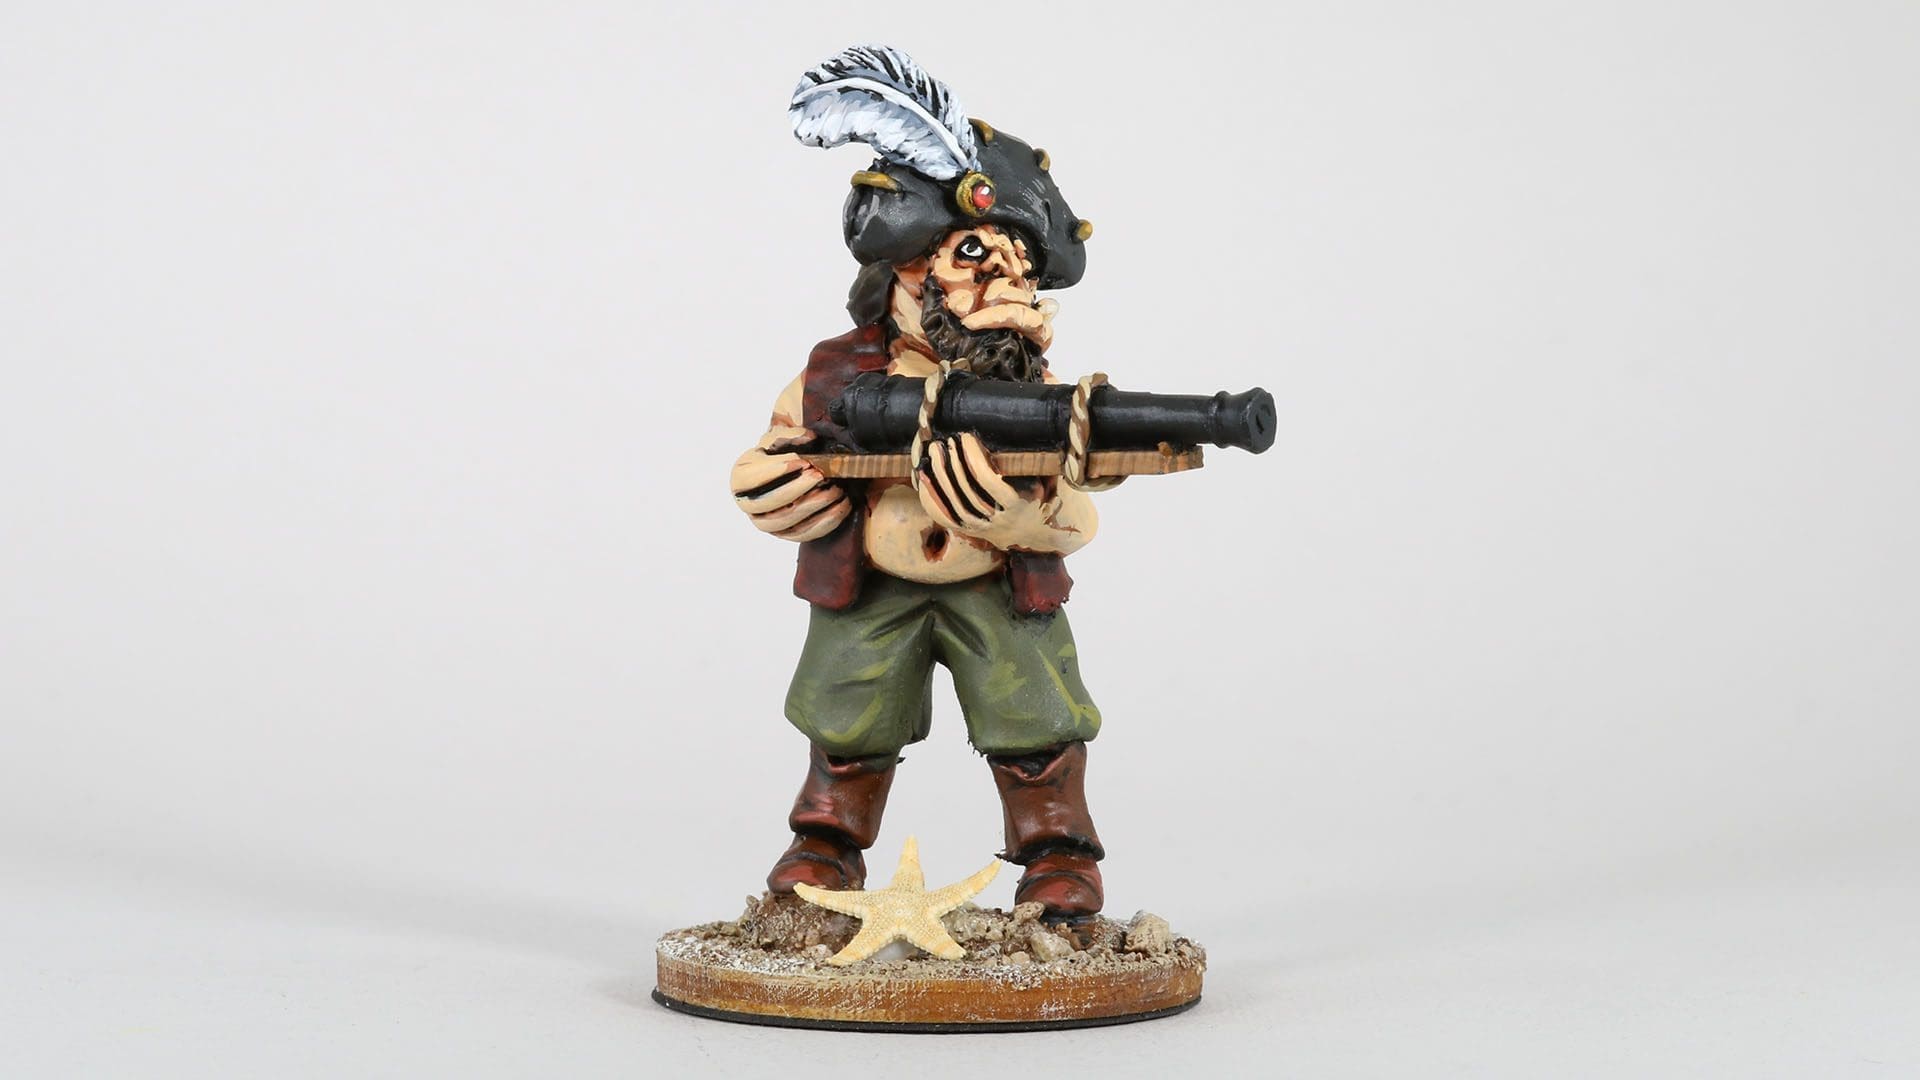 PM EMPO032 Pirate Ogre with Cannon III - BADGER GAMES